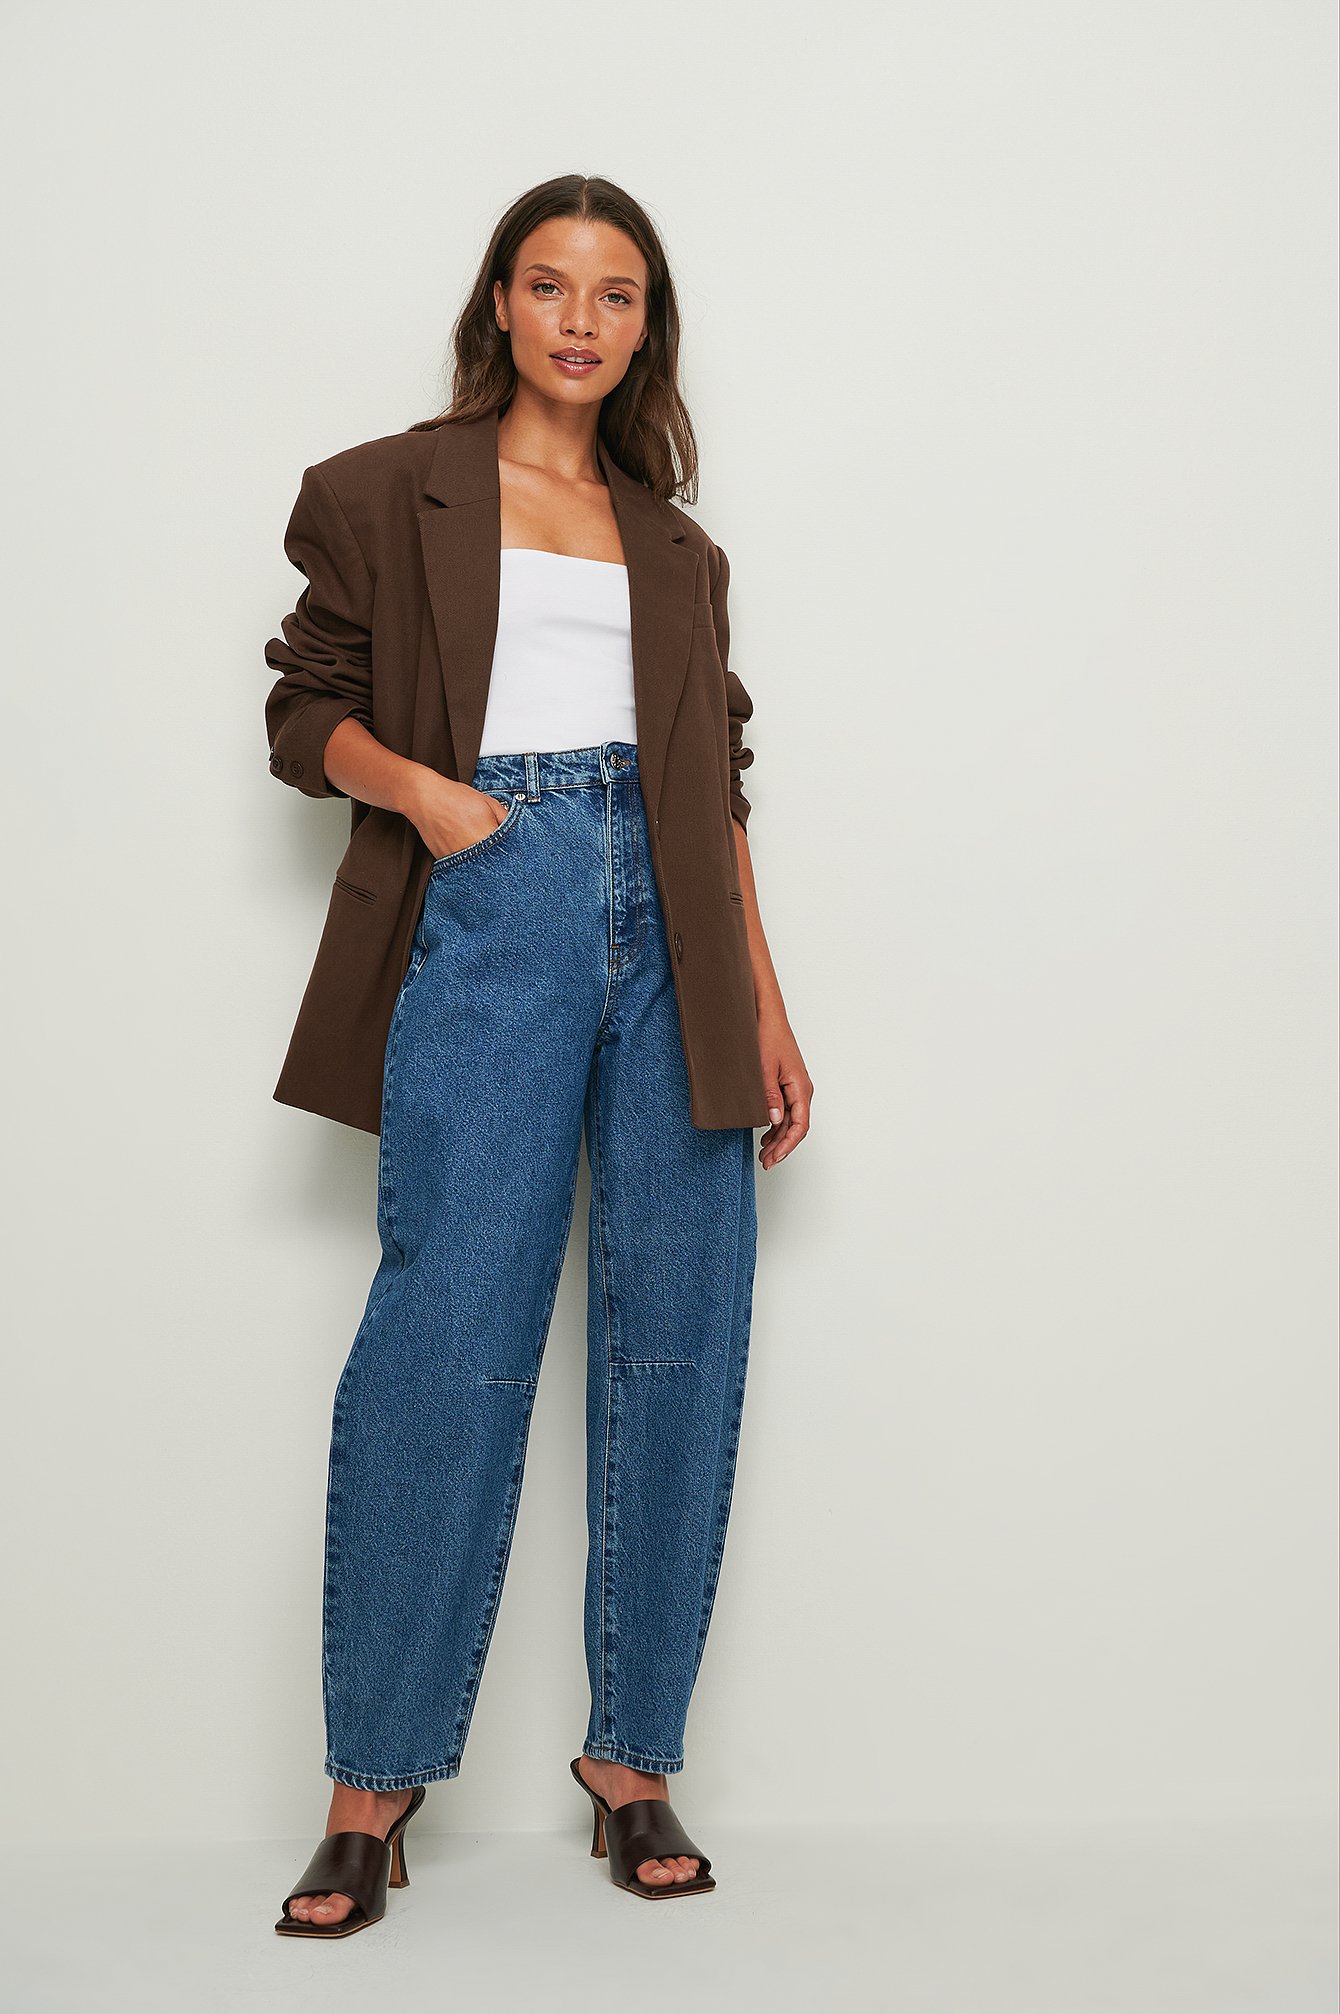 Cocoon Shaped Jeans Outfit